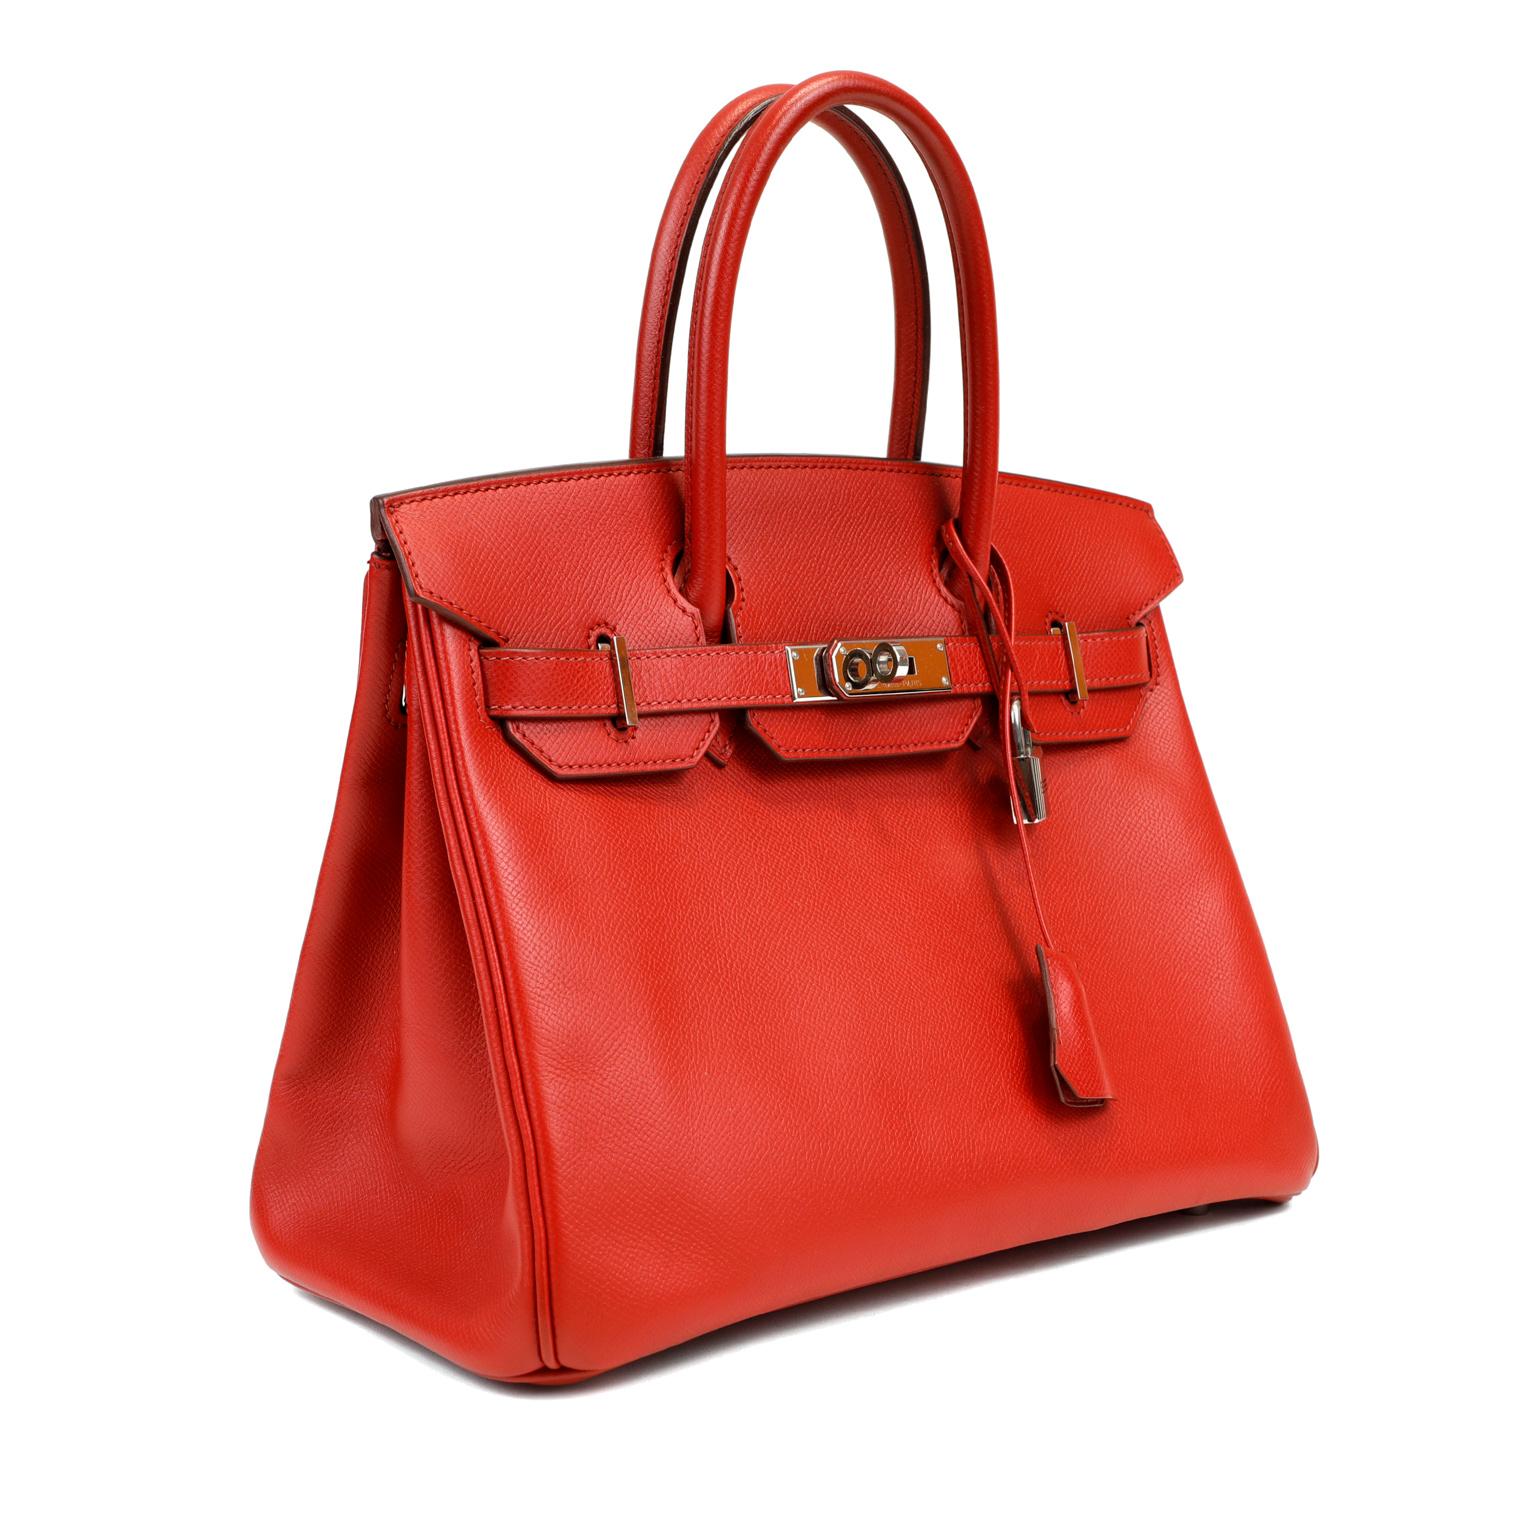 This authentic Hermès Vivid Red Epsom 30 cm Birkin is in excellent condition. Considered the ultimate luxury item, the Hermès Birkin is stitched by hand. Waitlists are commonplace and classic Rouge Casaque is always in high demand. 
Epsom leather is